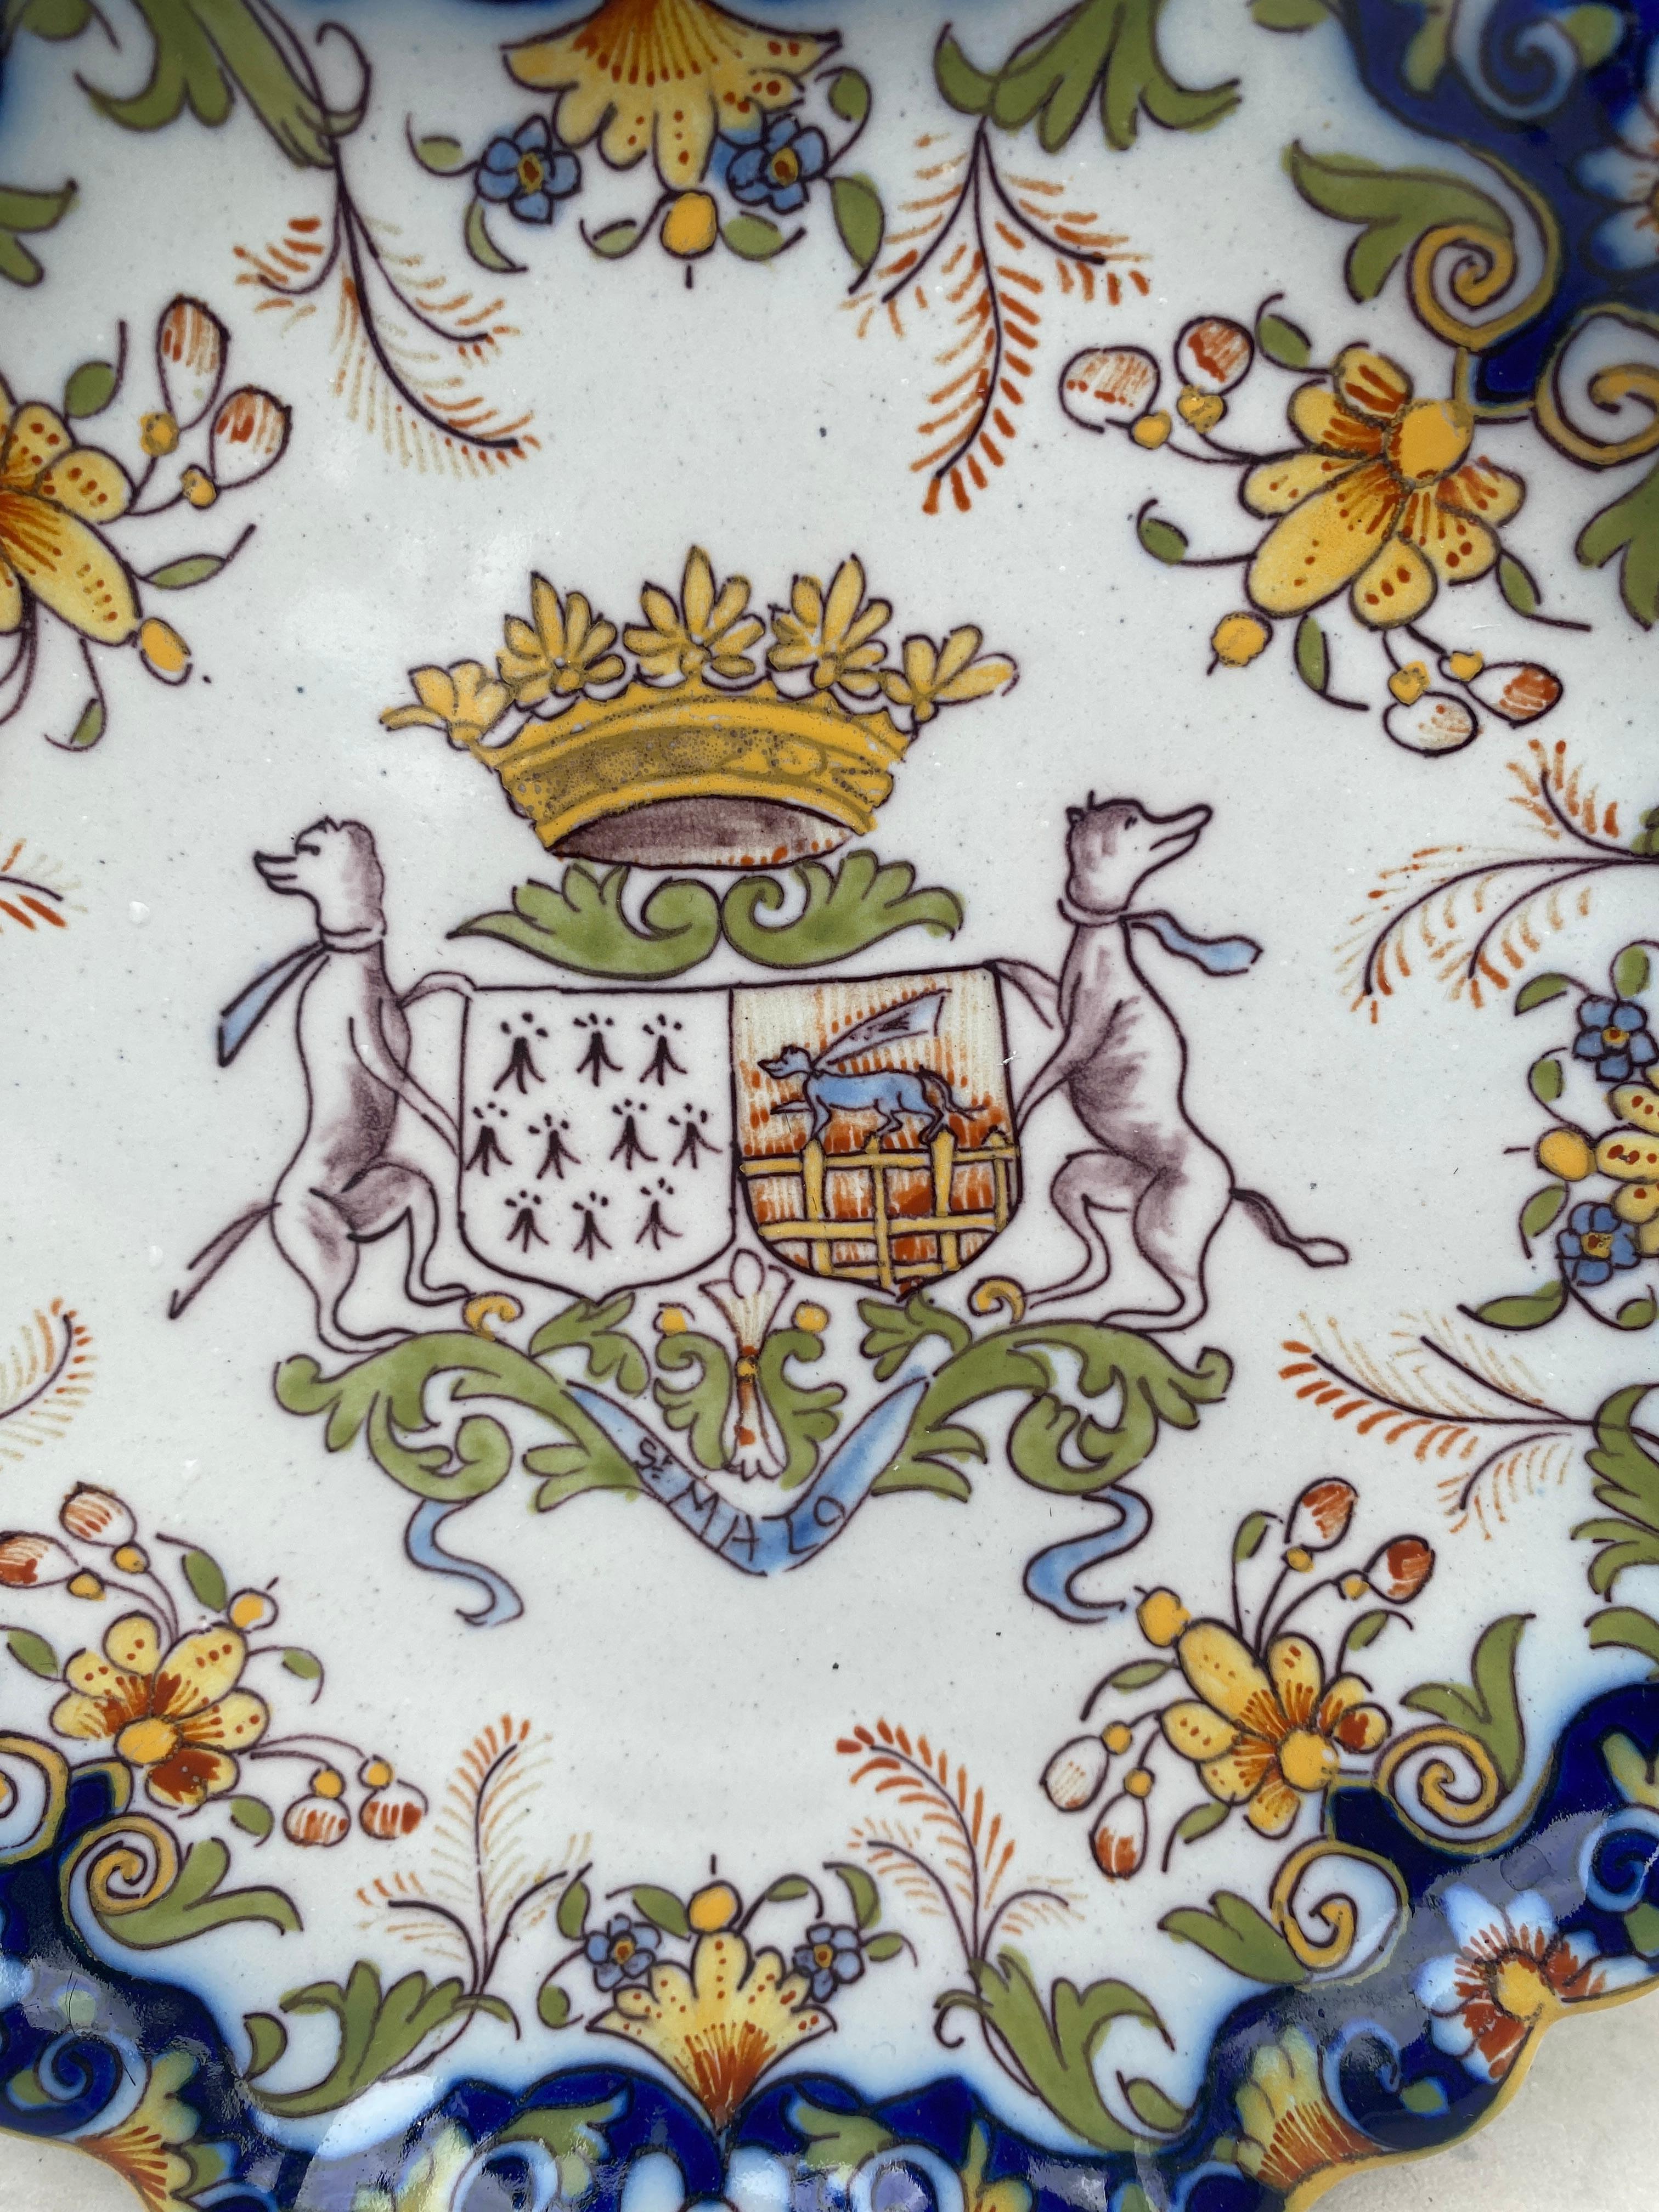 Antique French faience handled platter with coat of arms dogs and floral pattern, circa 1900. 